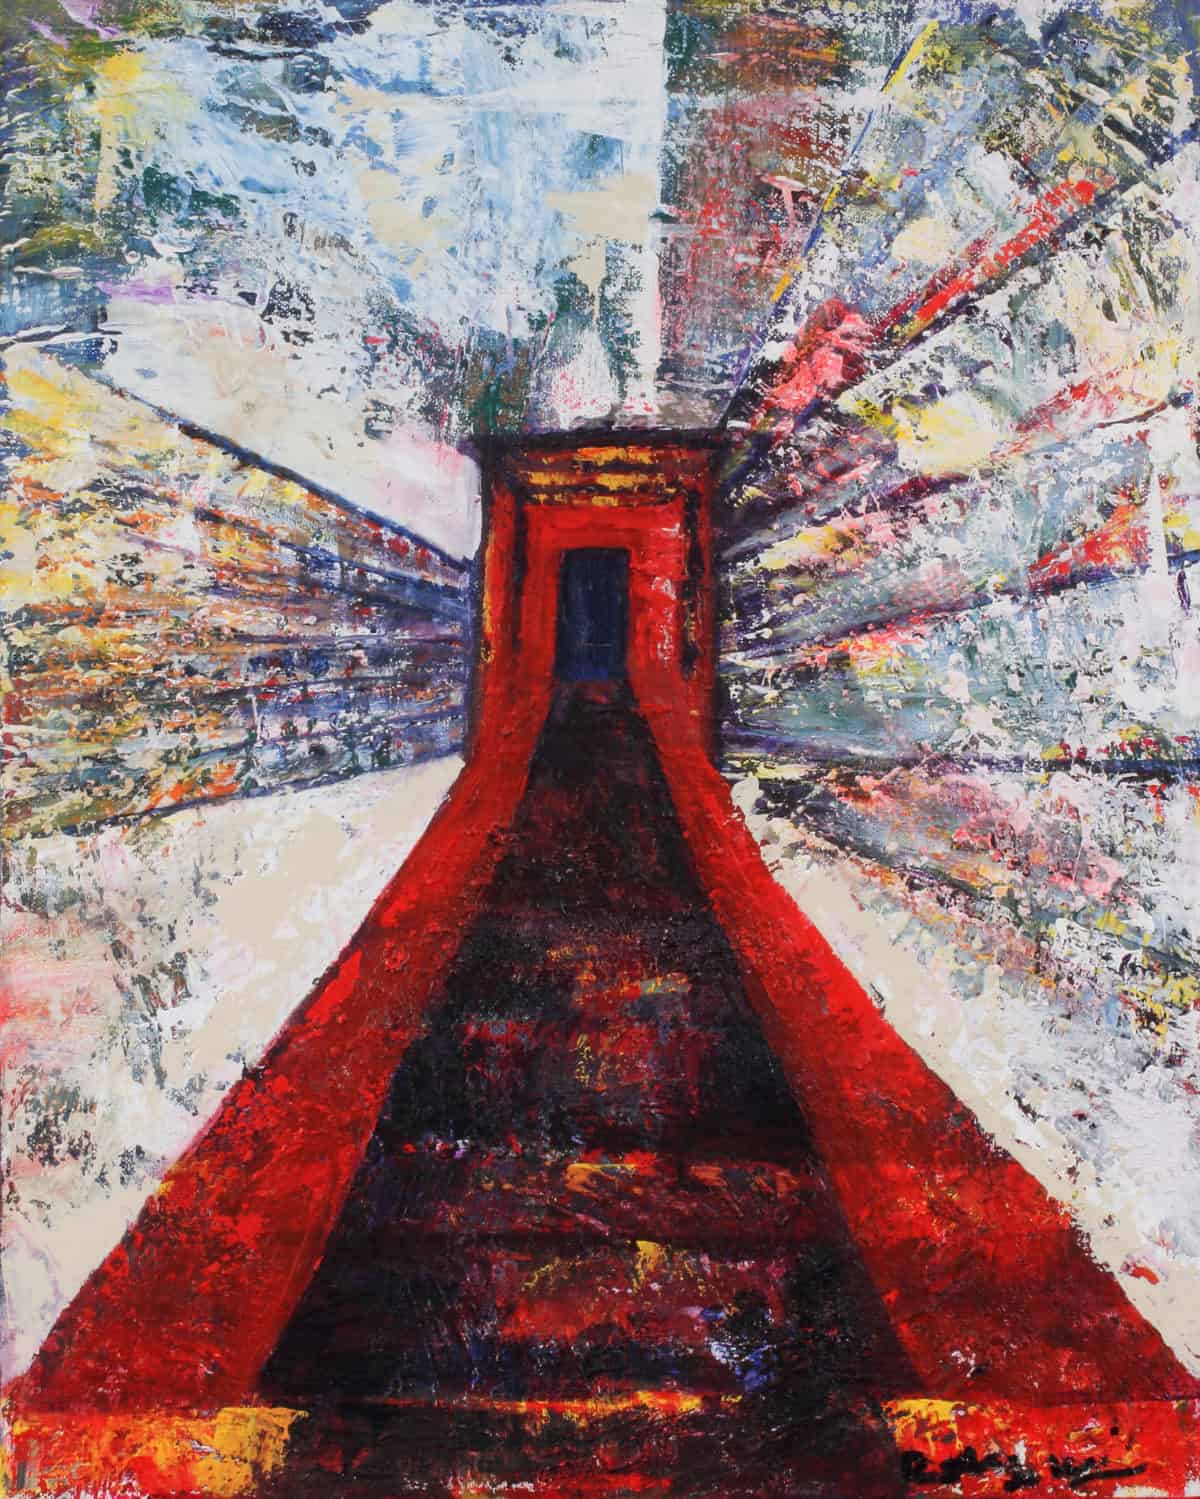 Red Door with Stairs - Original Cityscape & Stairwell Artwork by Ronit Galazan at RonitGallery